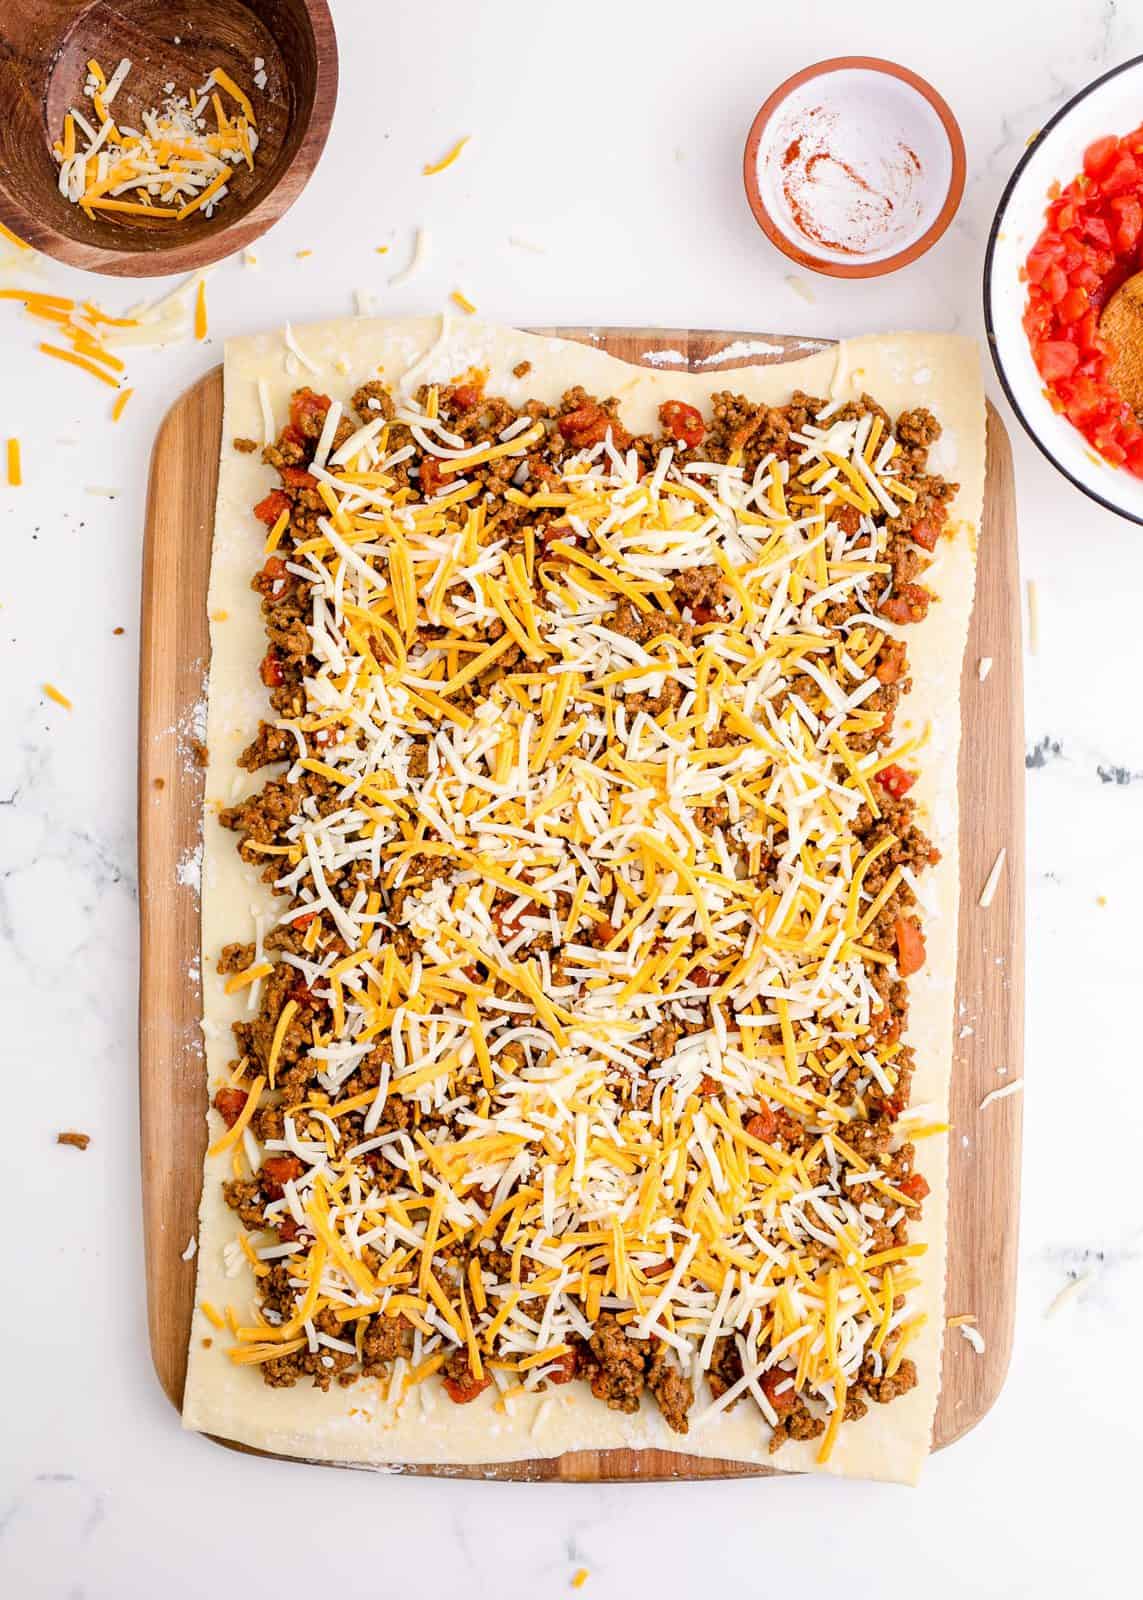 Taco mixture and cheese spread over puff pastry.